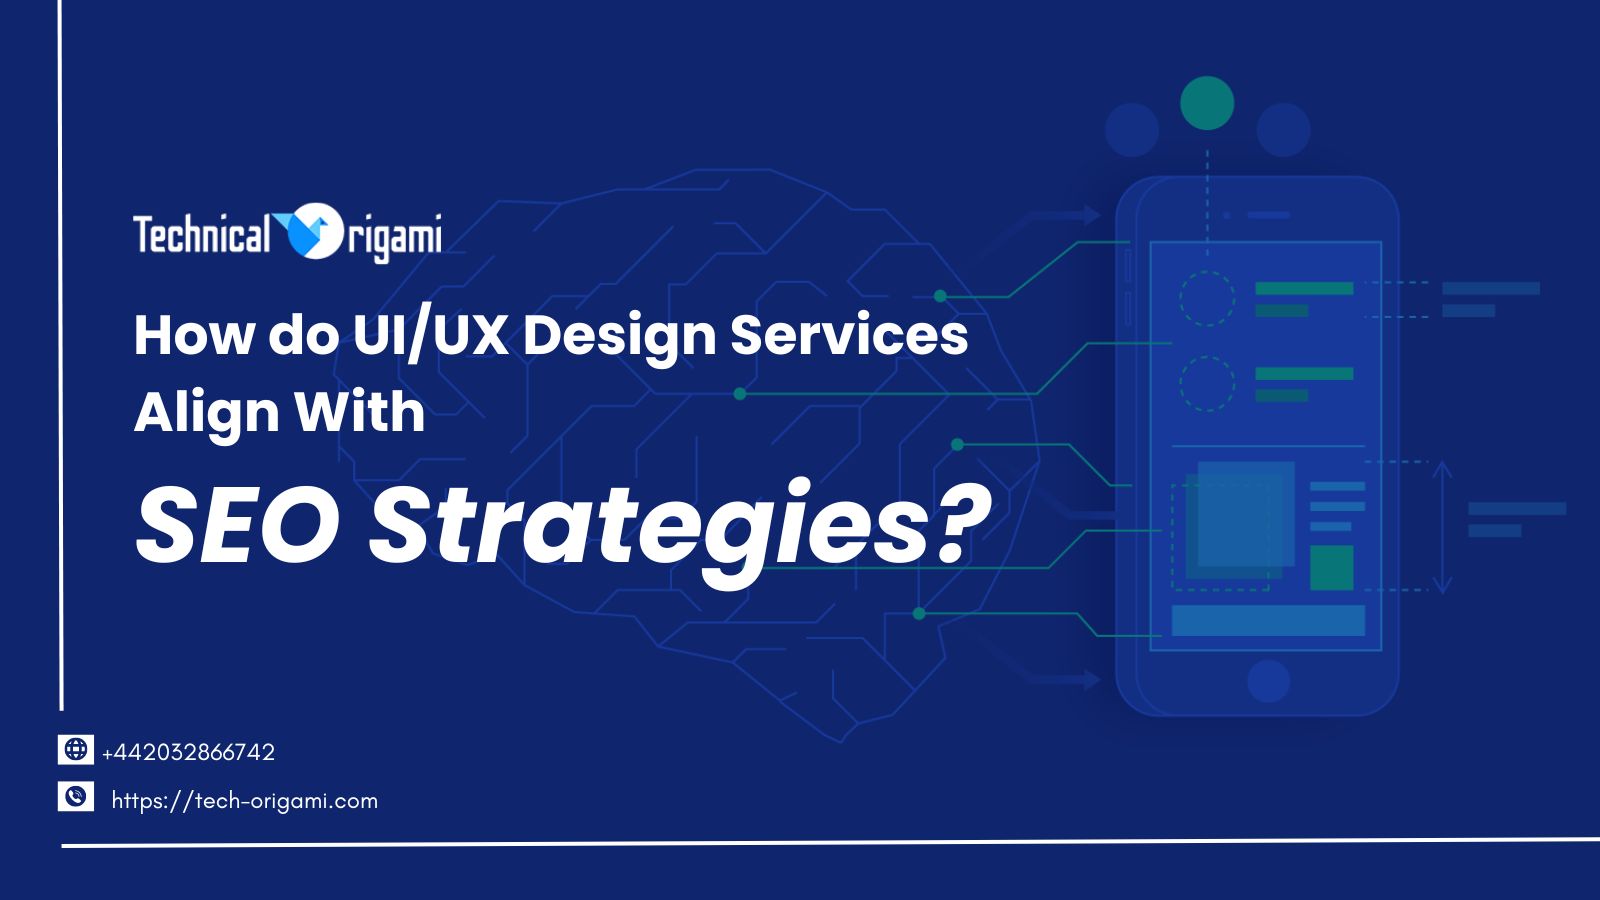 How do UI/UX Design Services Align With SEO Strategies?